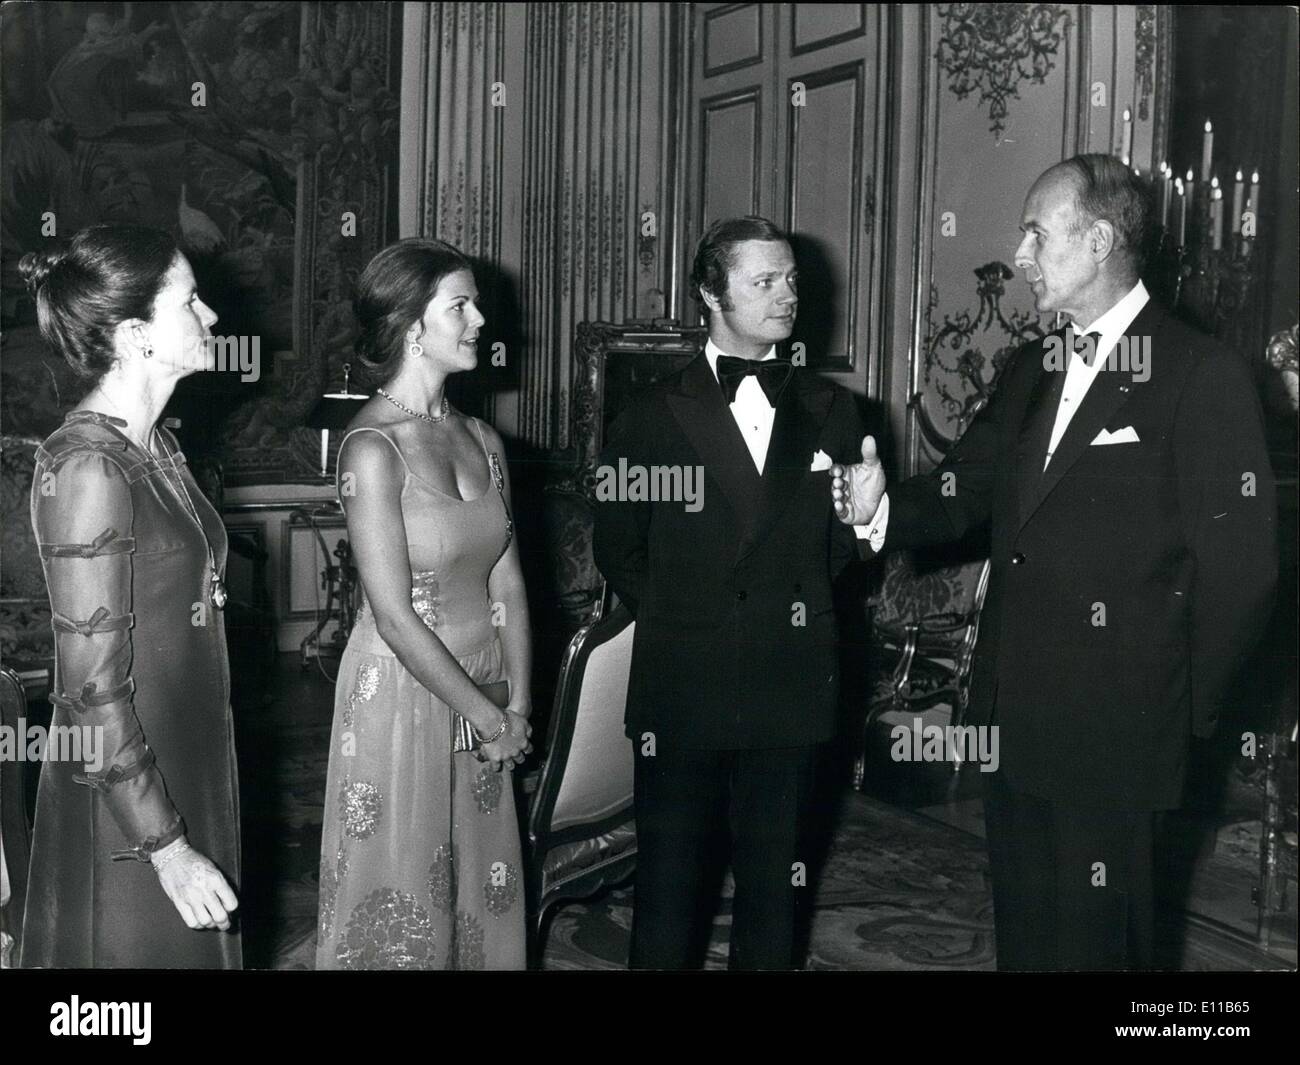 Nov. 10, 1976 - The King and Queen of Sweden attended a dinner held in their honor at the Elysee Palace in Paris. : Stock Photo